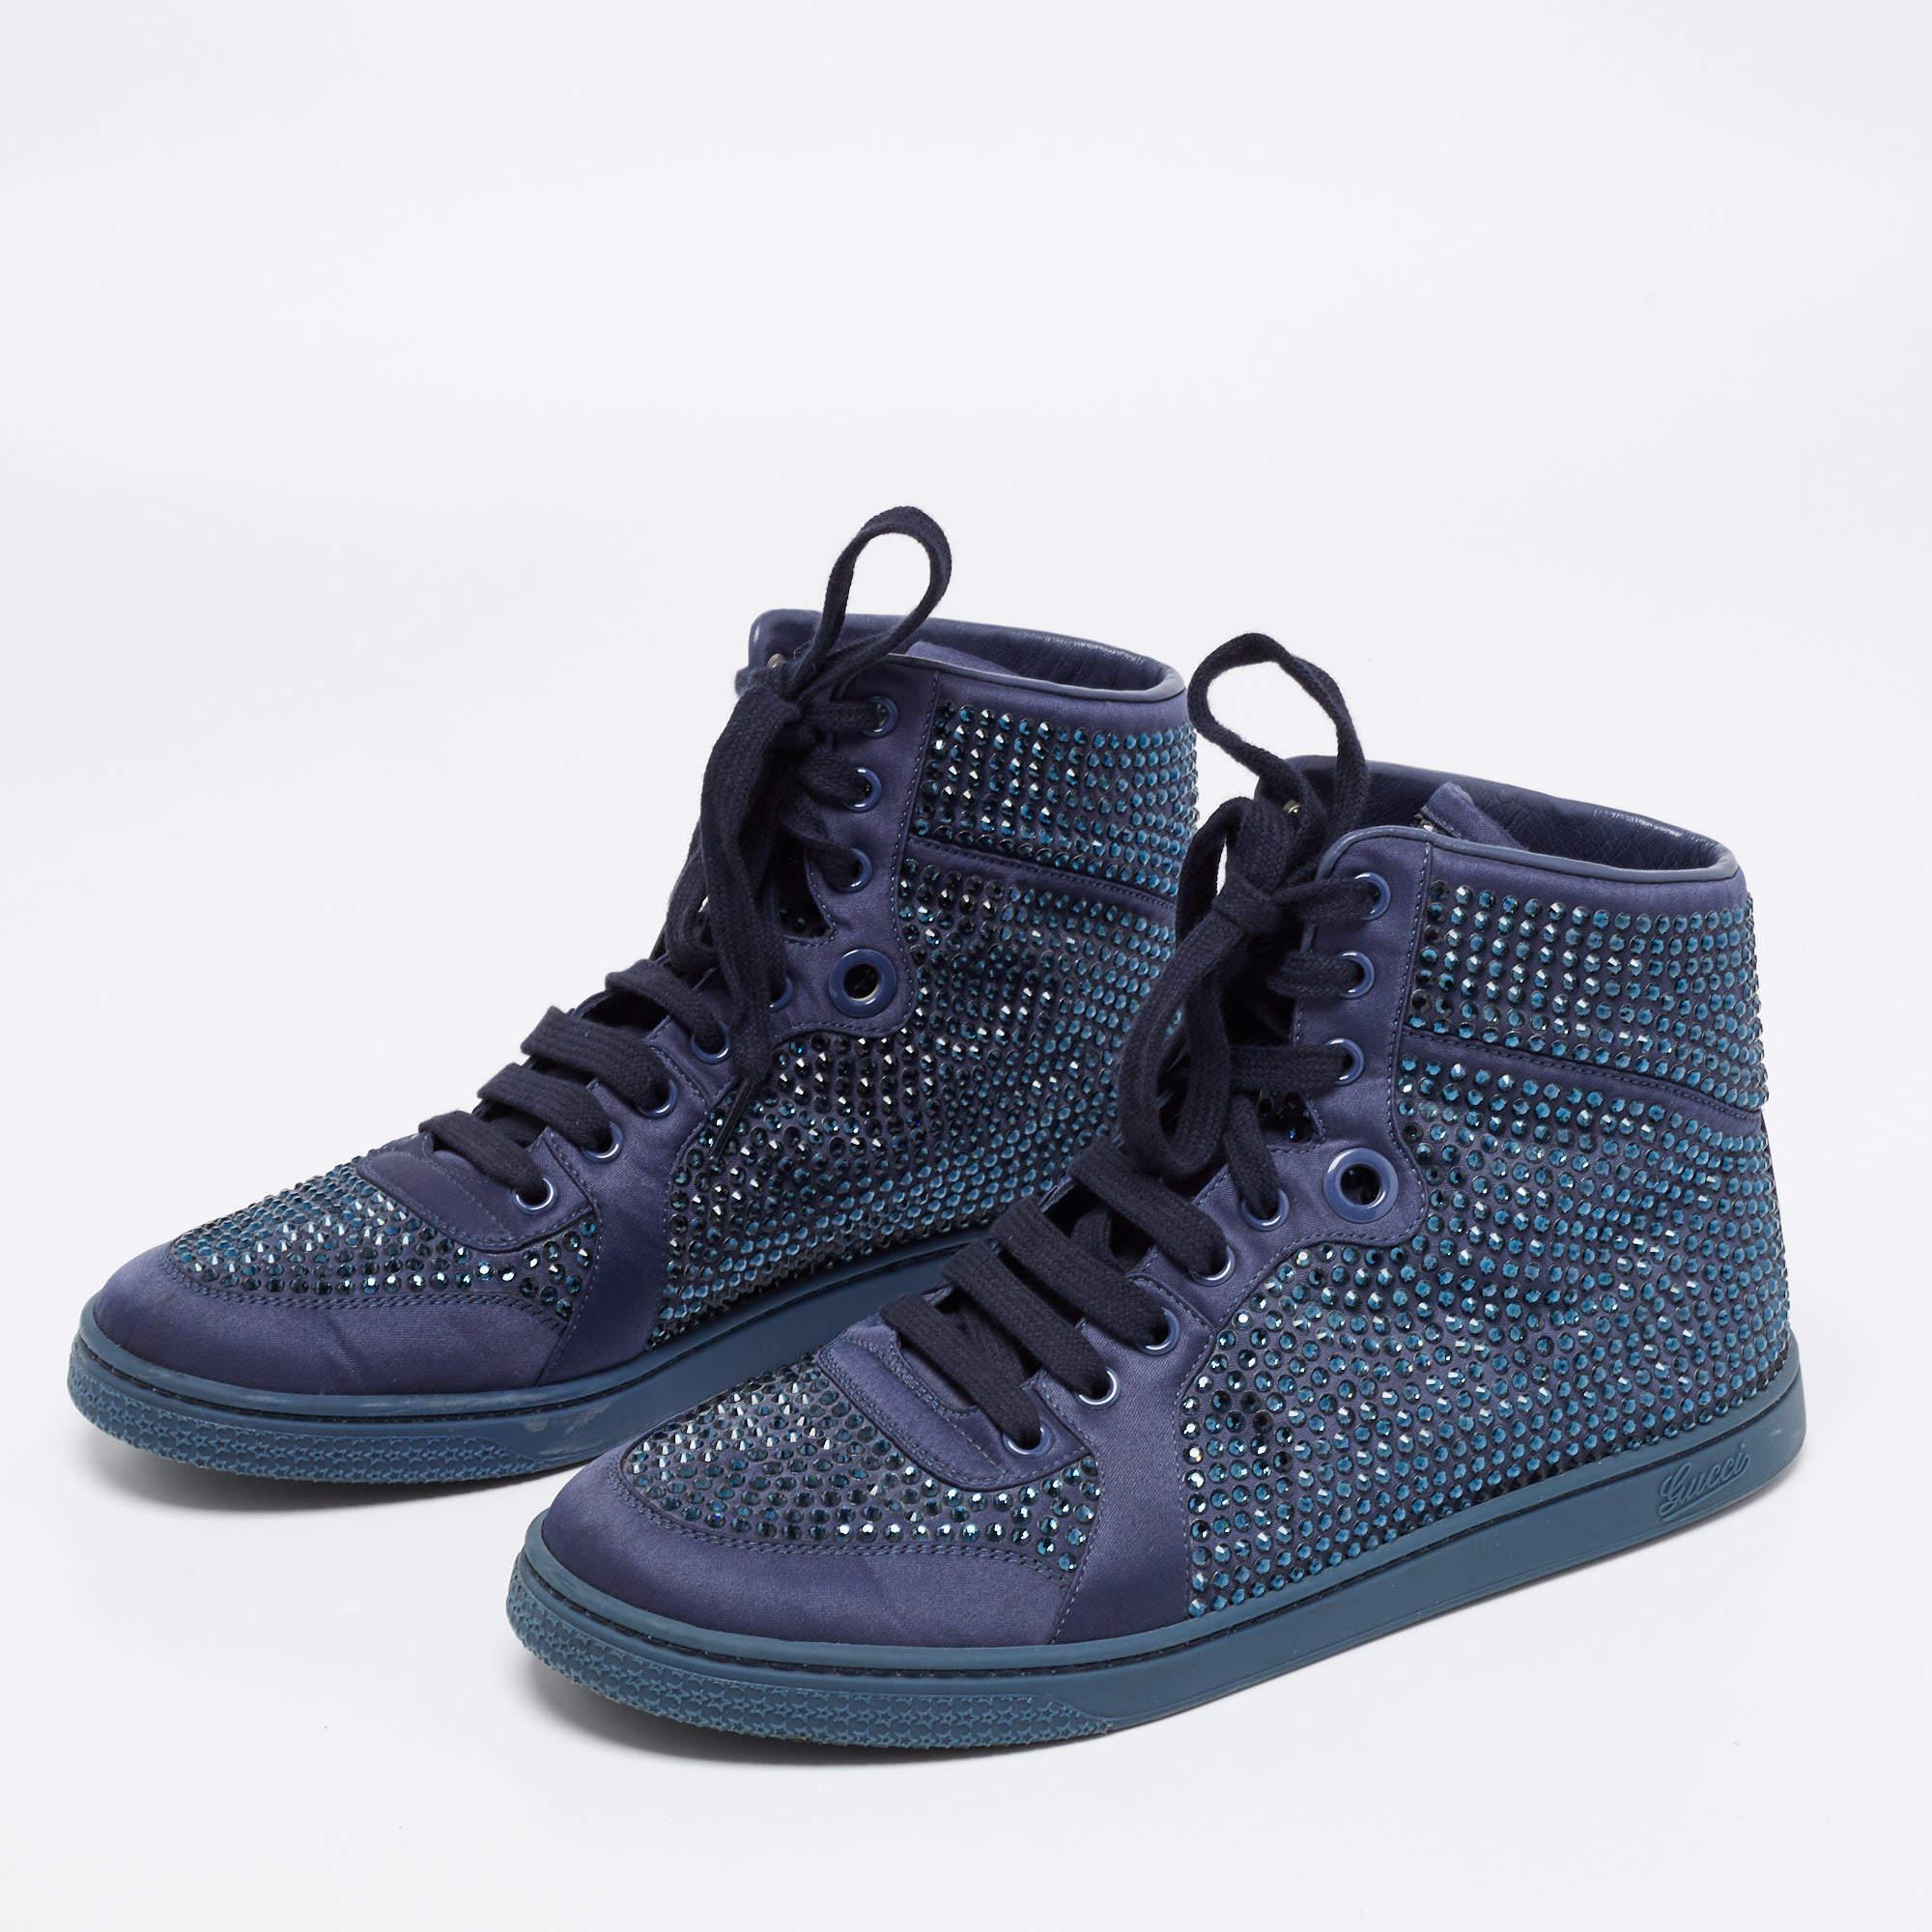 Men's Gucci Blue Satin Crystal Embellished High Top Sneakers Size 39.5 For Sale